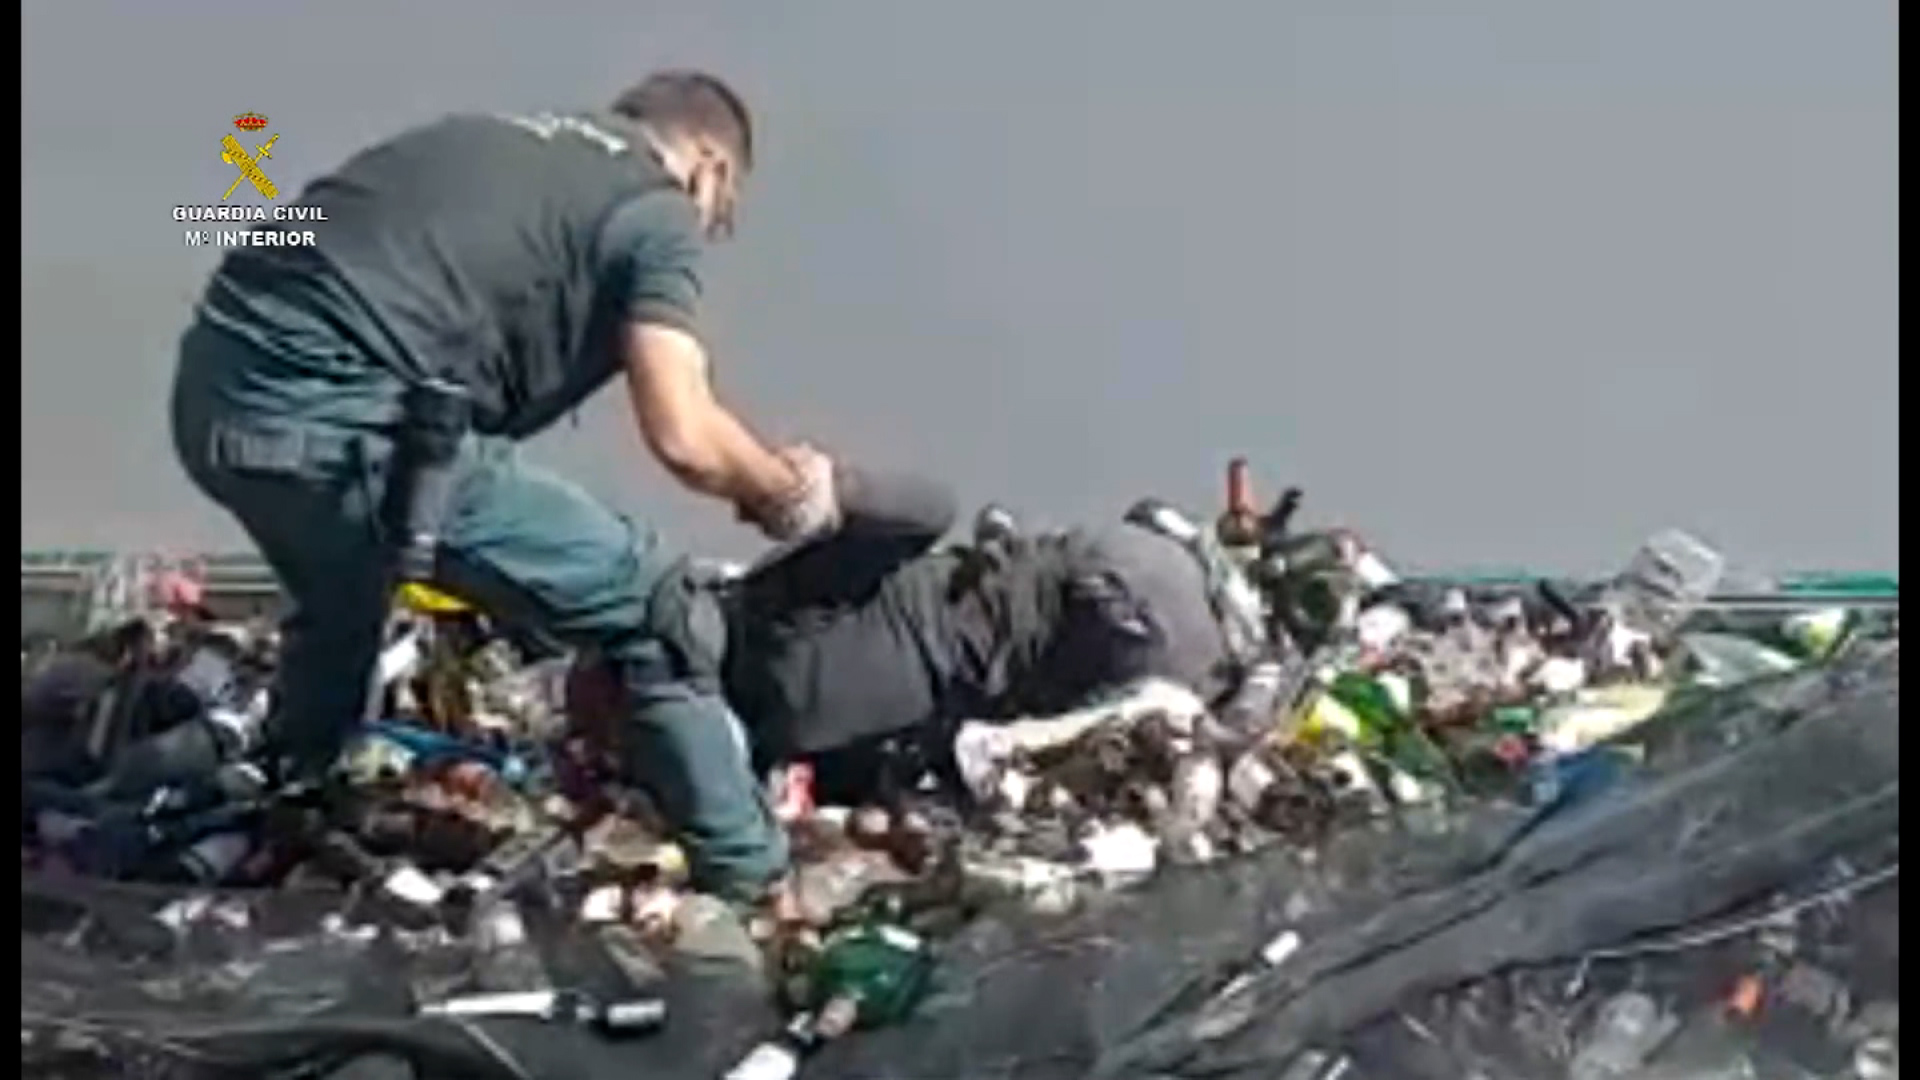 They are rescuing 41 migrants hidden in the rubble at the port of Melilla